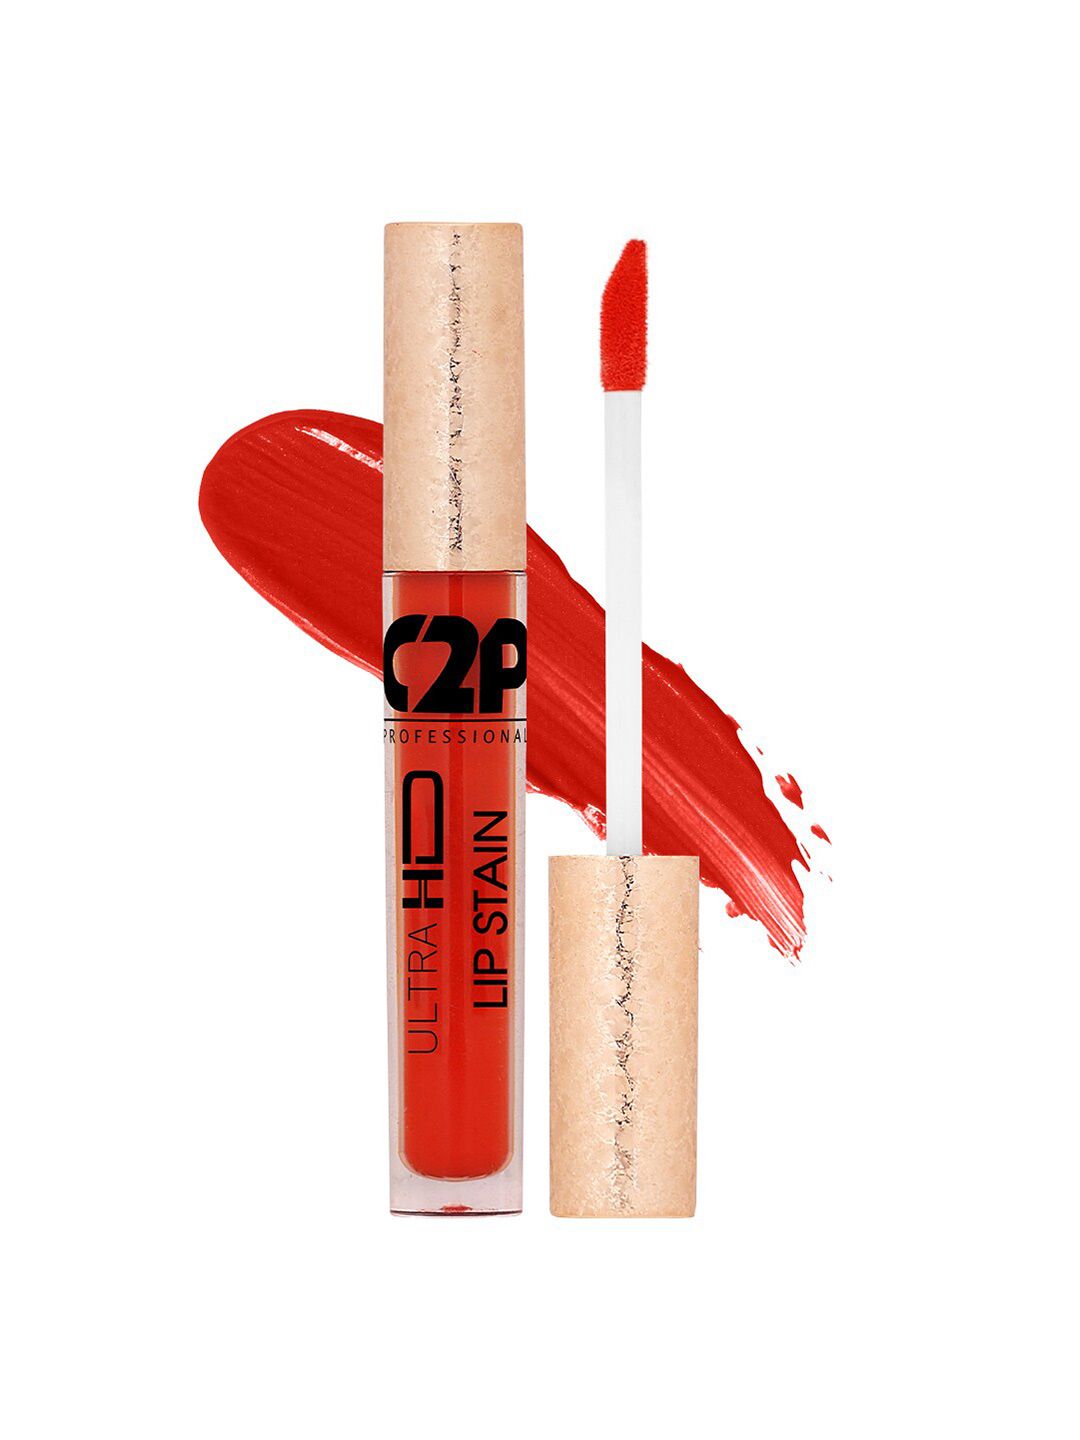 C2P PROFESSIONAL MAKEUP Lip Stain Liquid Lipstick - Turn On The Lights 10 5 ml Price in India